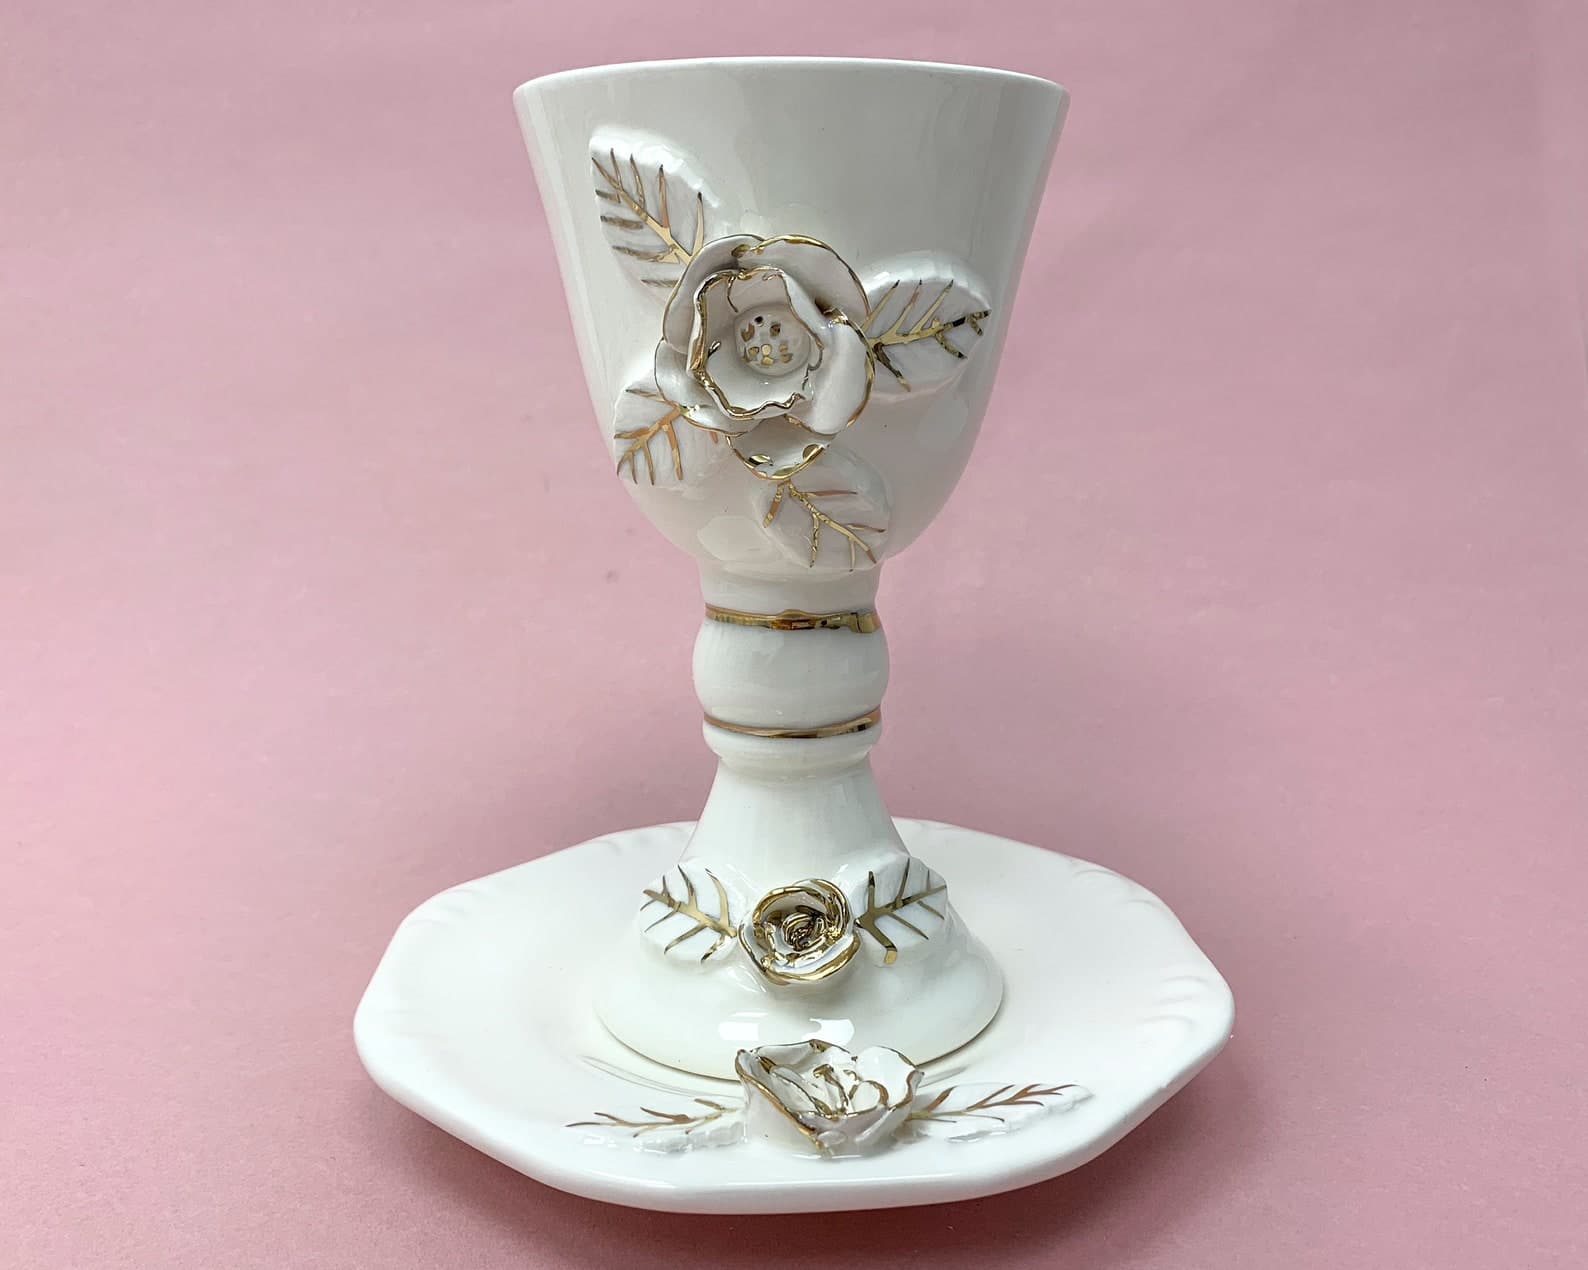 Decorated Ceramic White and Gold Wine Goblet and Plate